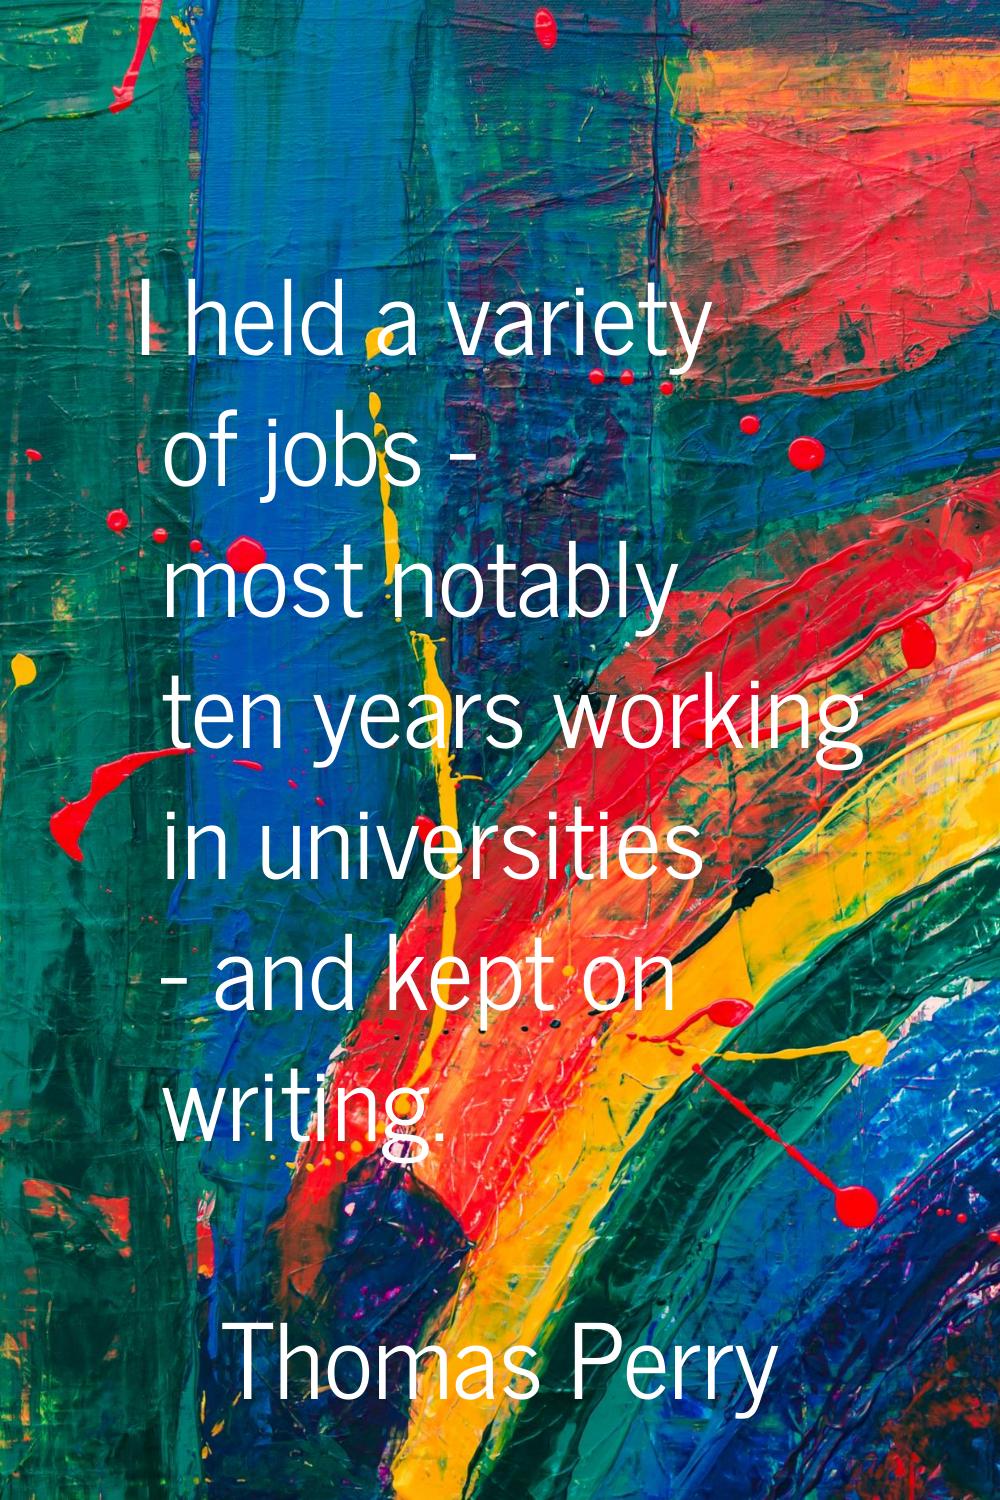 I held a variety of jobs - most notably ten years working in universities - and kept on writing.